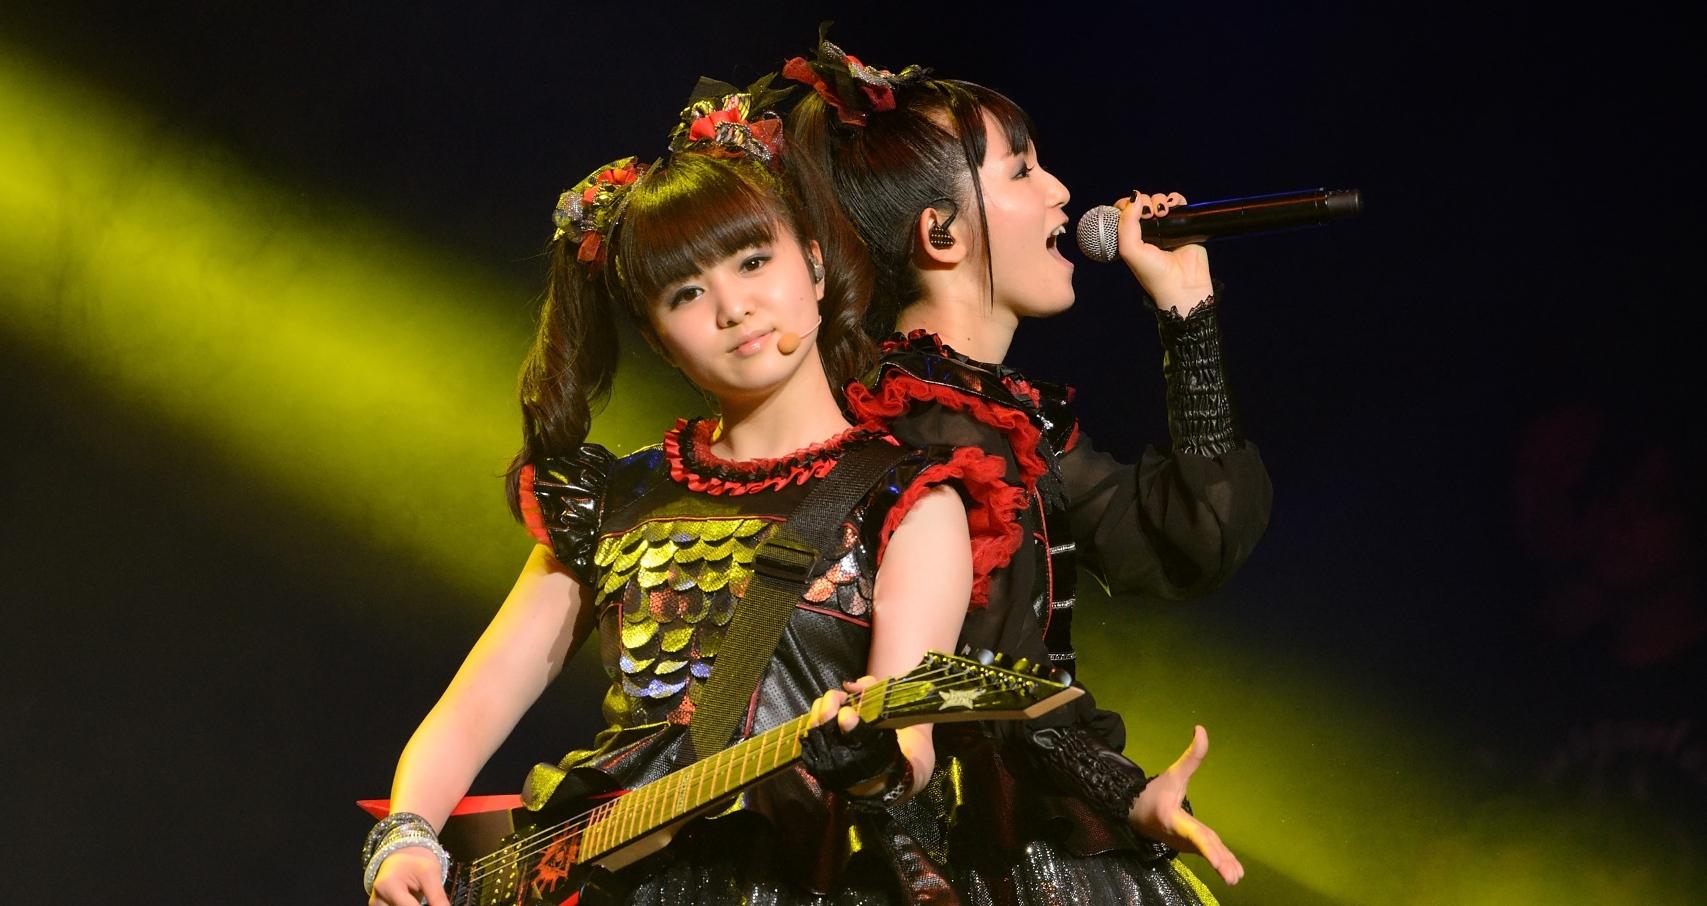 Moametal and Su-metal of Babymetal perform during the Alternative Press Music Awards